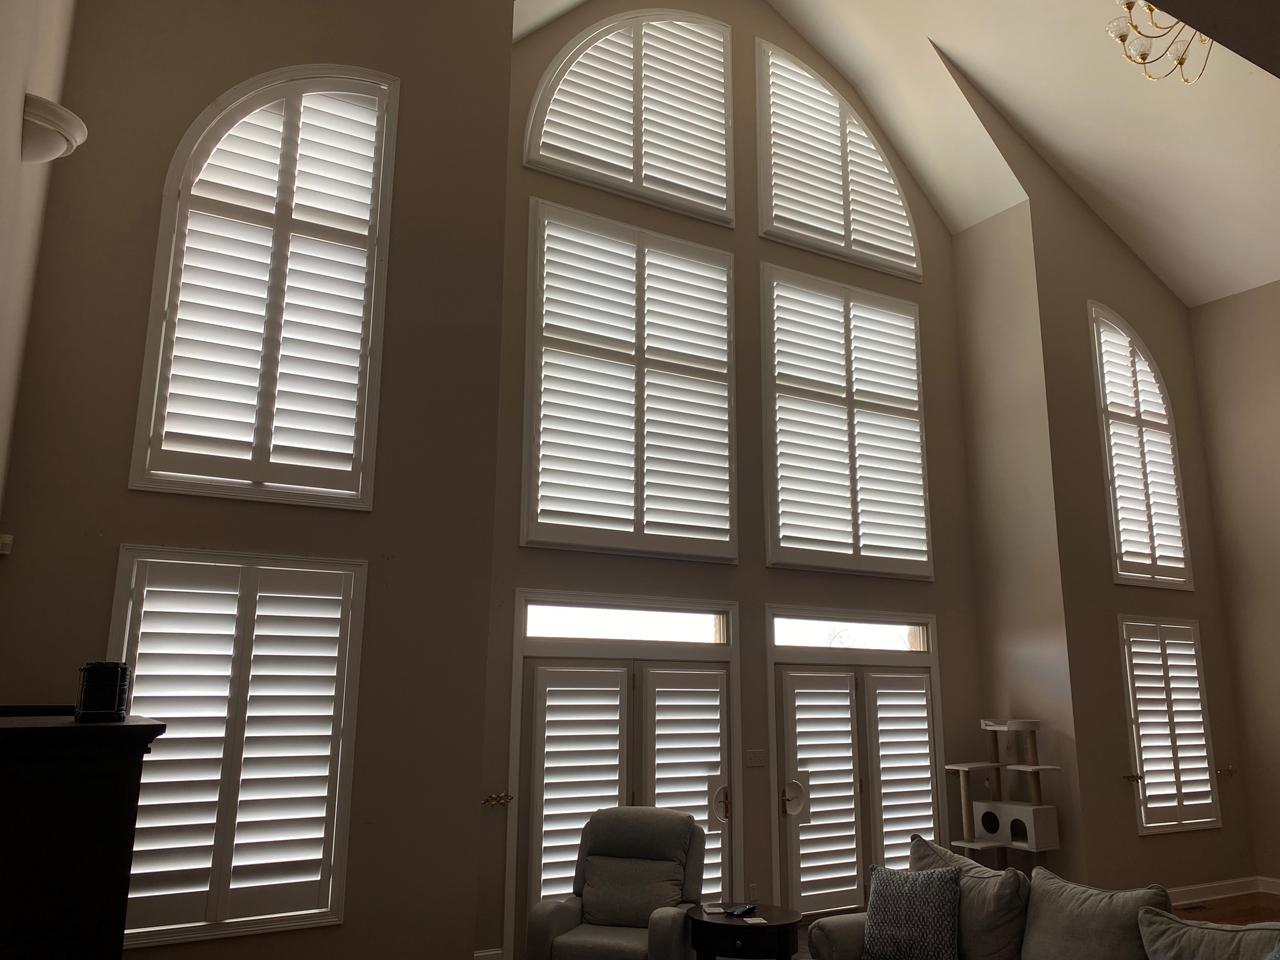 French doors, arches and rectangular shutters